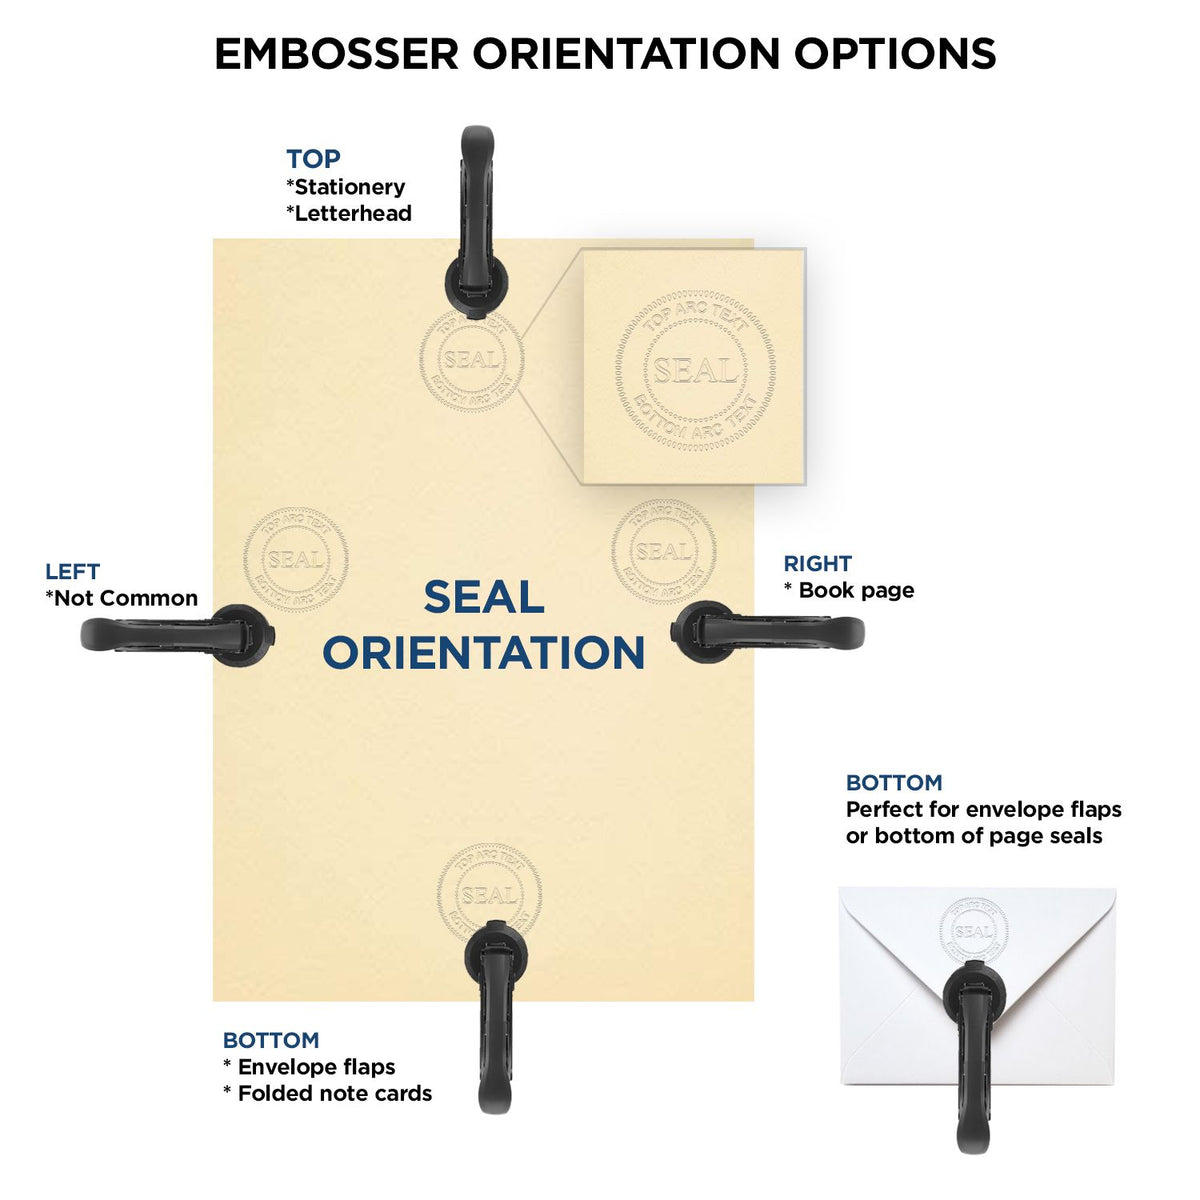 An infographic for the Heavy Duty Cast Iron Oklahoma Engineer Seal Embosser showing embosser orientation, this is showing examples of a top, bottom, right and left insert.